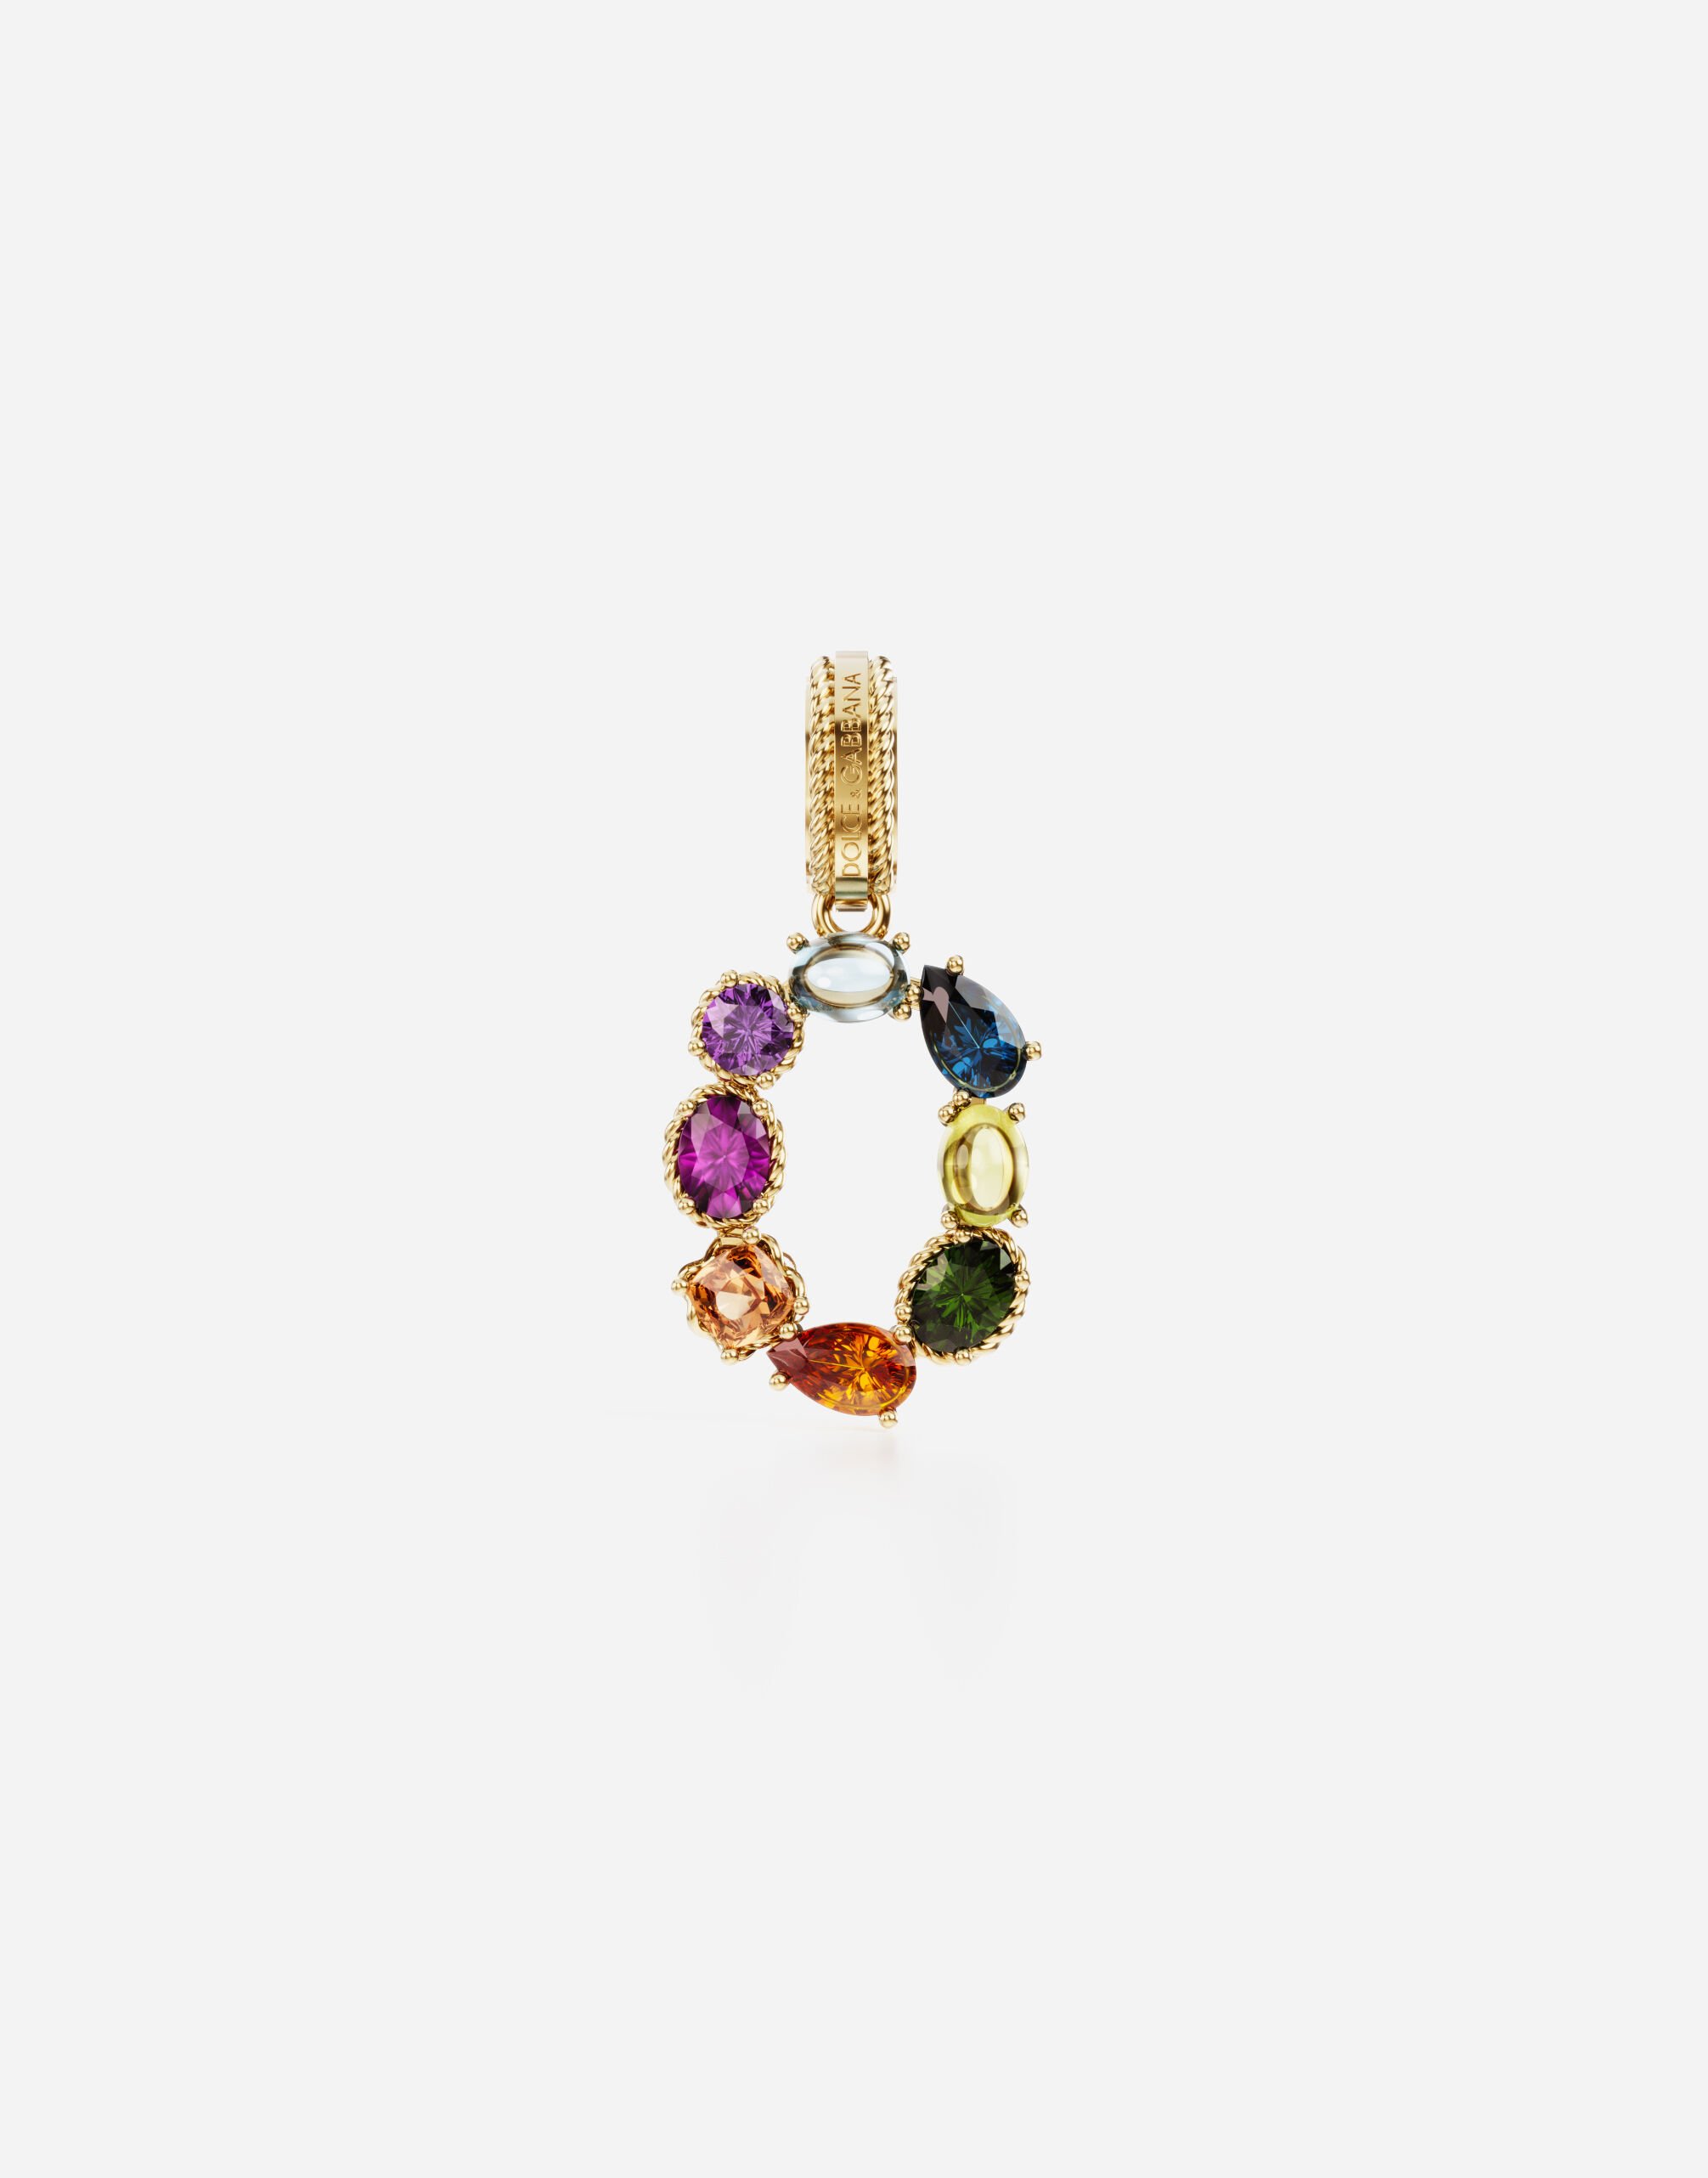 Dolce & Gabbana 18 kt yellow gold rainbow pendant  with multicolor finegemstones representing number 0 Gold WANR1GWMIXA